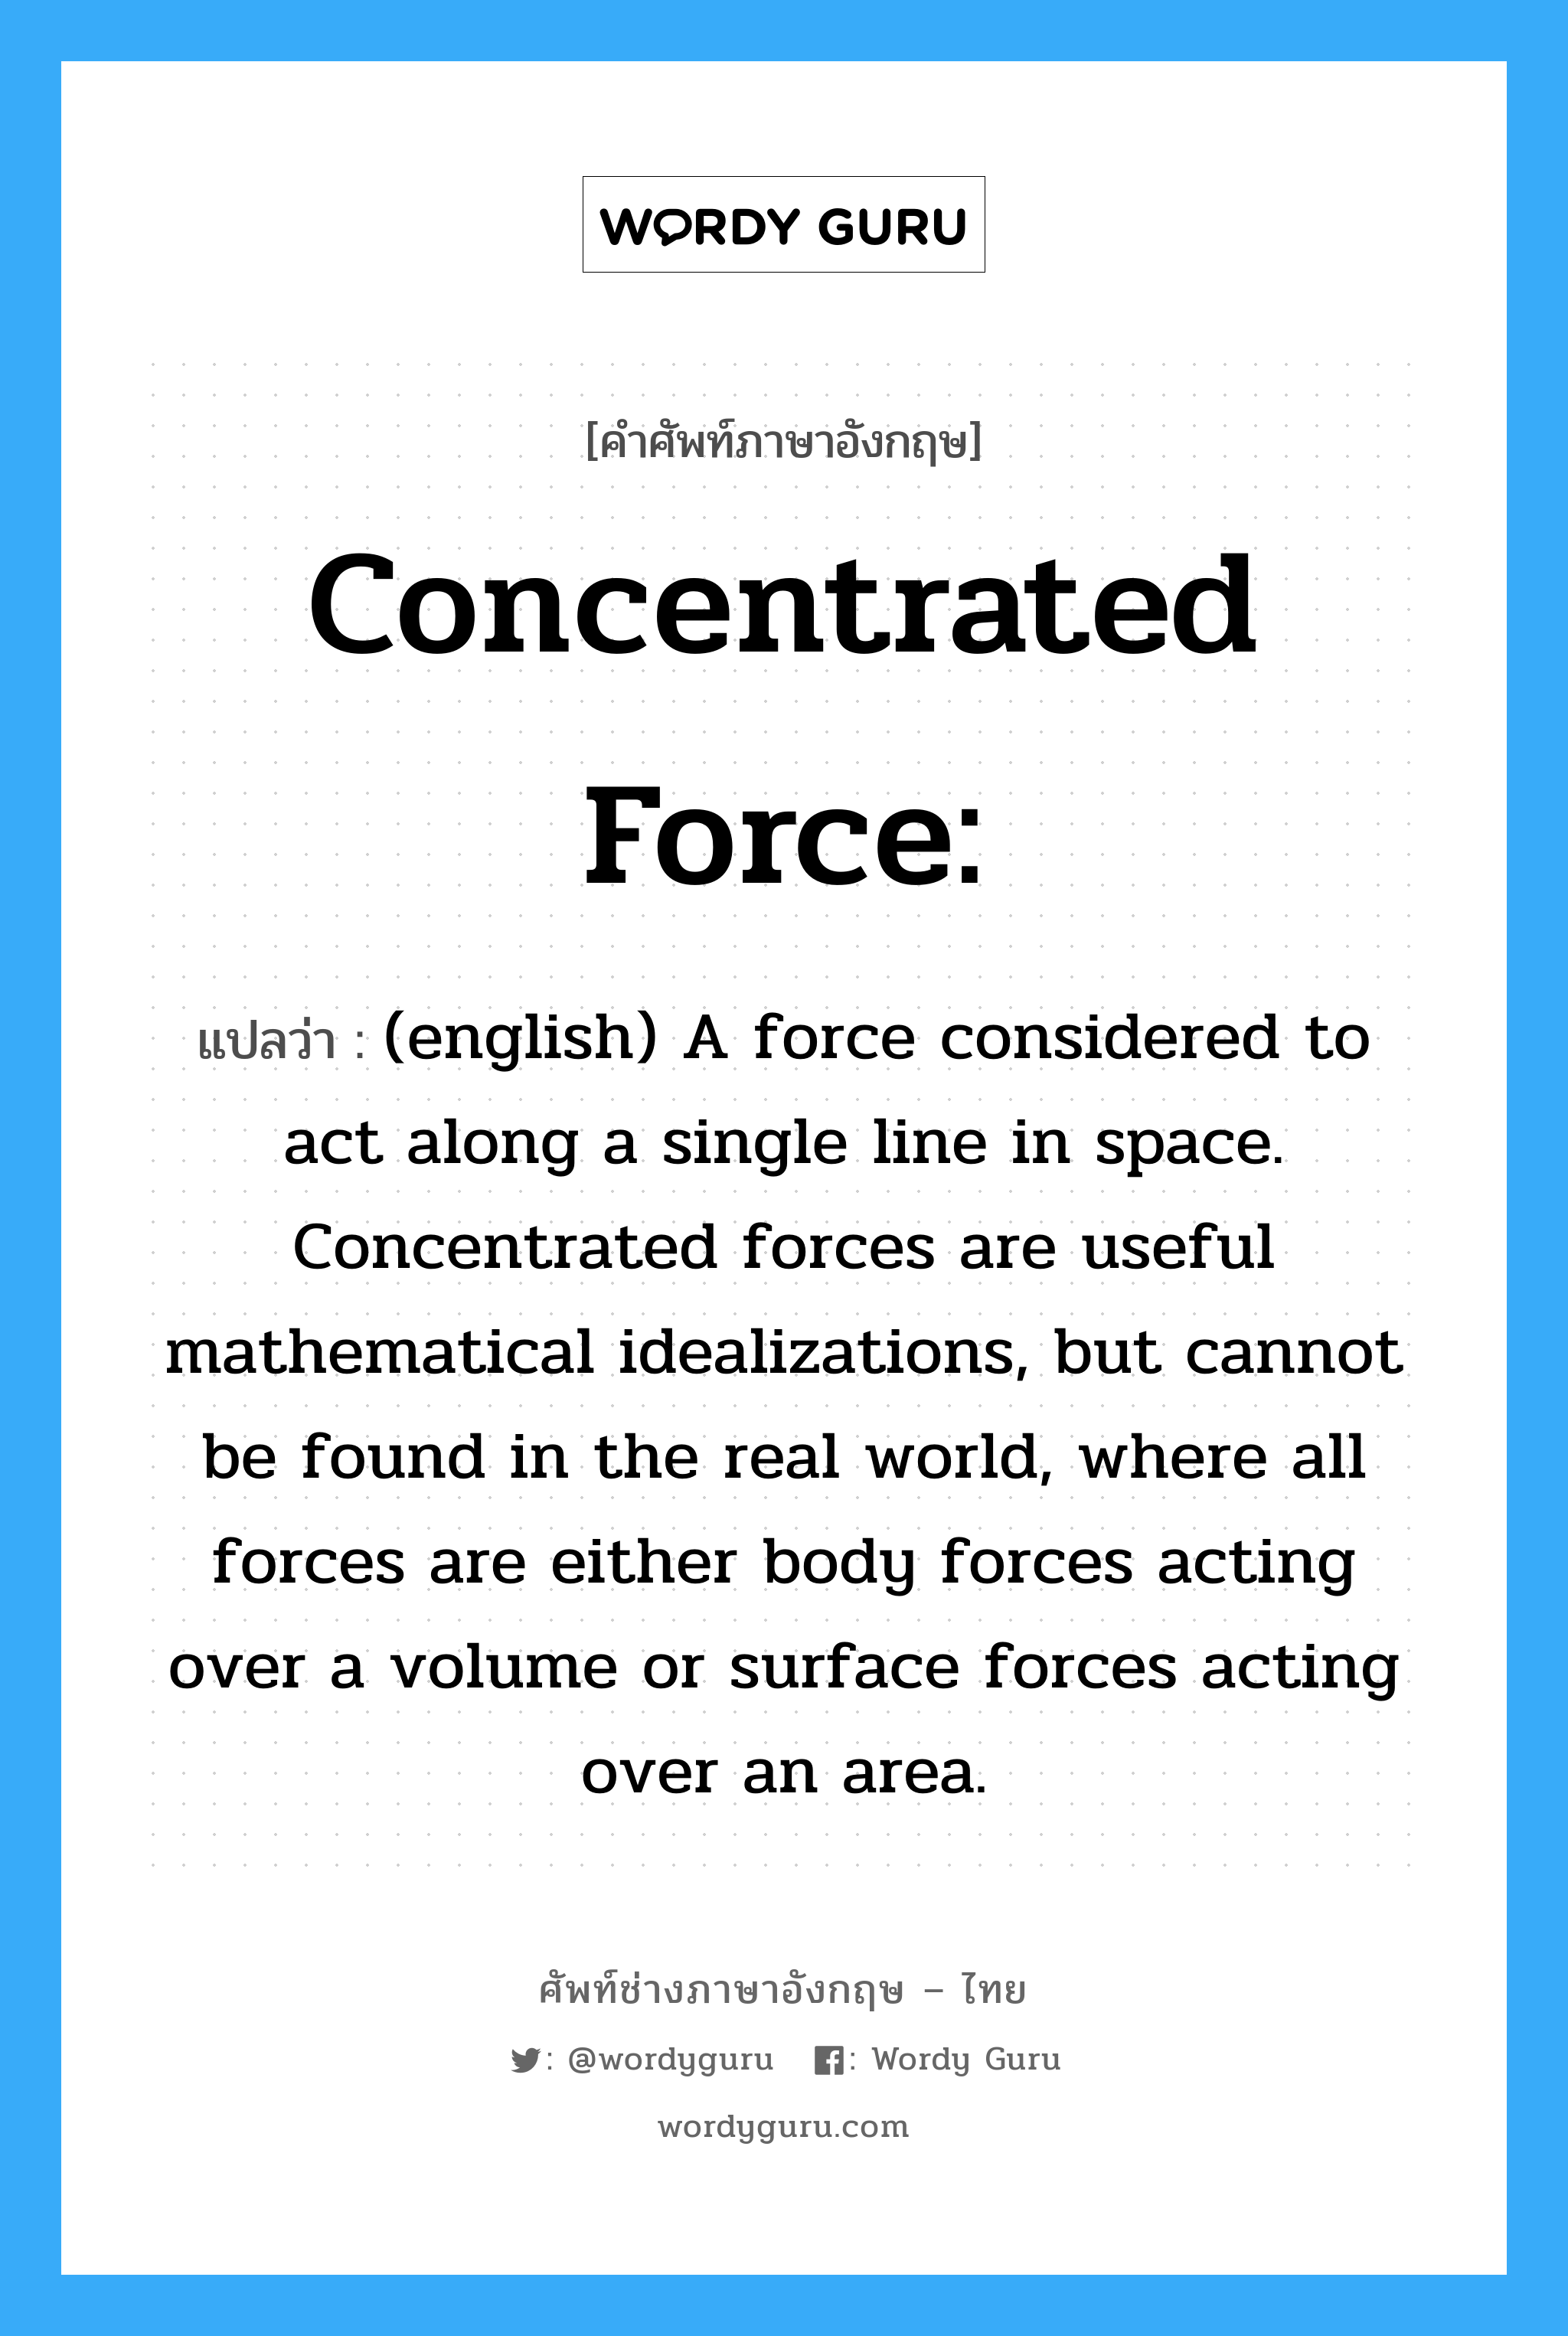 (english) A force considered to act along a single line in space. Concentrated forces are useful mathematical idealizations, but cannot be found in the real world, where all forces are either body forces acting over a volume or surface forces acting over an area. ภาษาอังกฤษ?, คำศัพท์ช่างภาษาอังกฤษ - ไทย (english) A force considered to act along a single line in space. Concentrated forces are useful mathematical idealizations, but cannot be found in the real world, where all forces are either body forces acting over a volume or surface forces acting over an area. คำศัพท์ภาษาอังกฤษ (english) A force considered to act along a single line in space. Concentrated forces are useful mathematical idealizations, but cannot be found in the real world, where all forces are either body forces acting over a volume or surface forces acting over an area. แปลว่า Concentrated force: